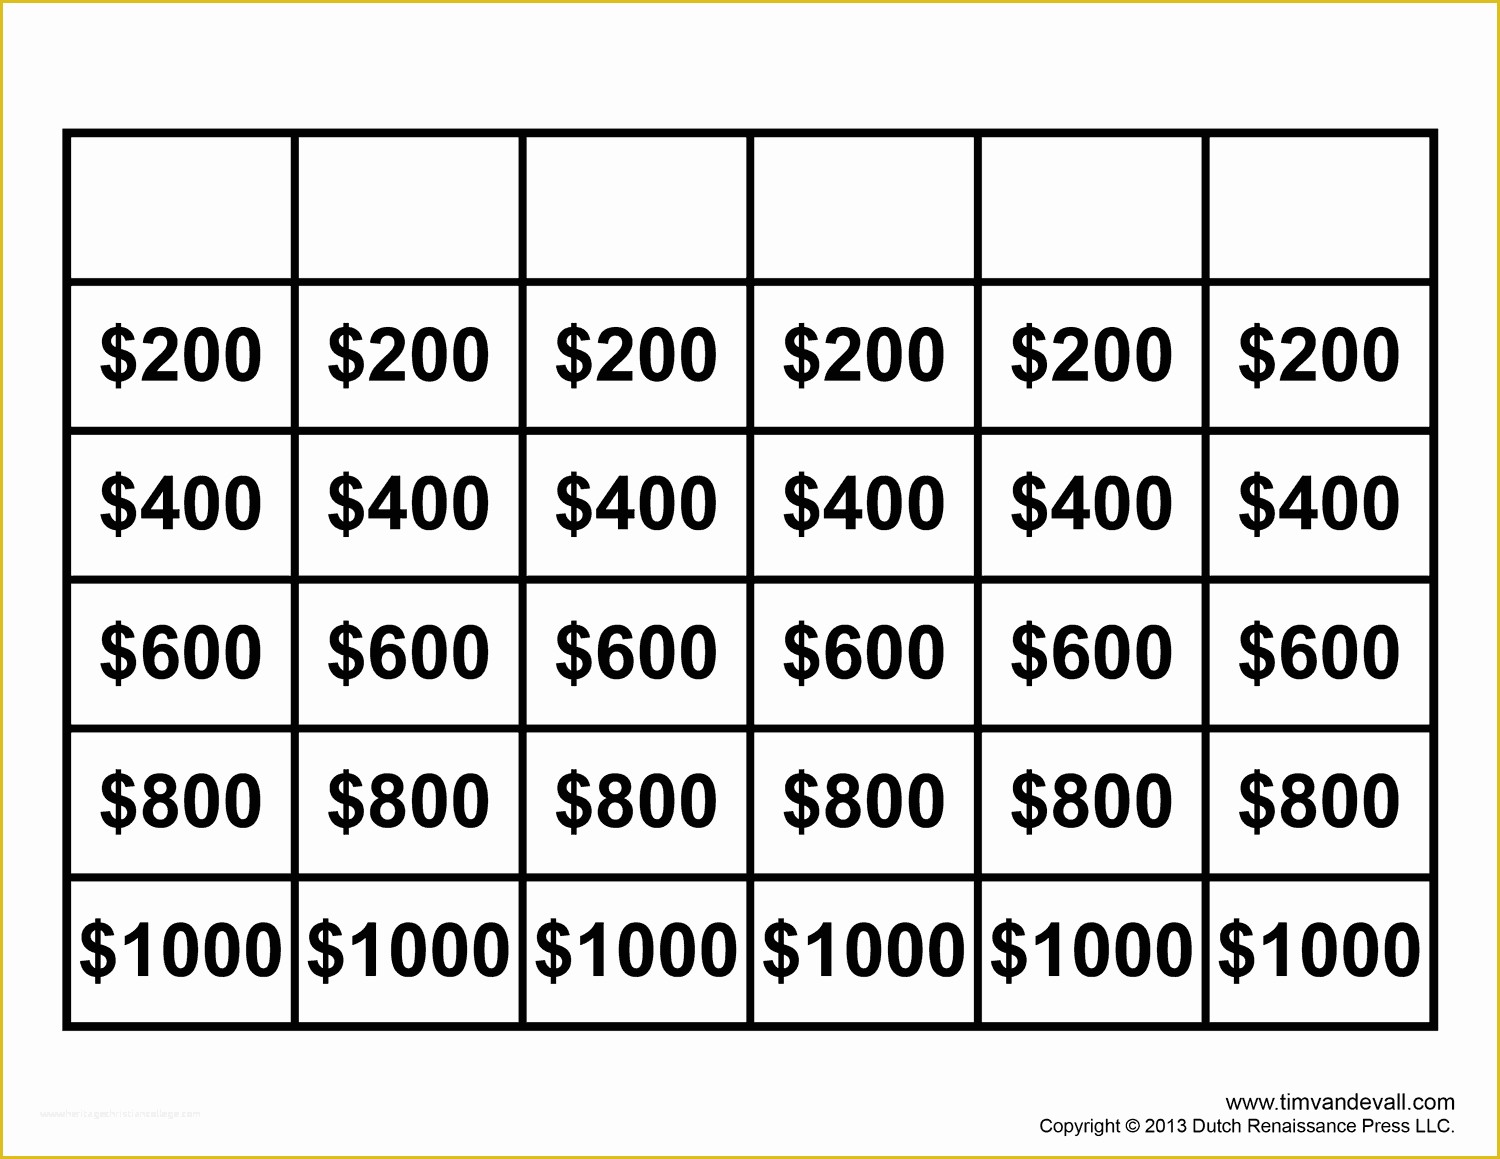 Free Jeopardy Template Of Free Jeopardy Template Make Your Own Jeopardy Game